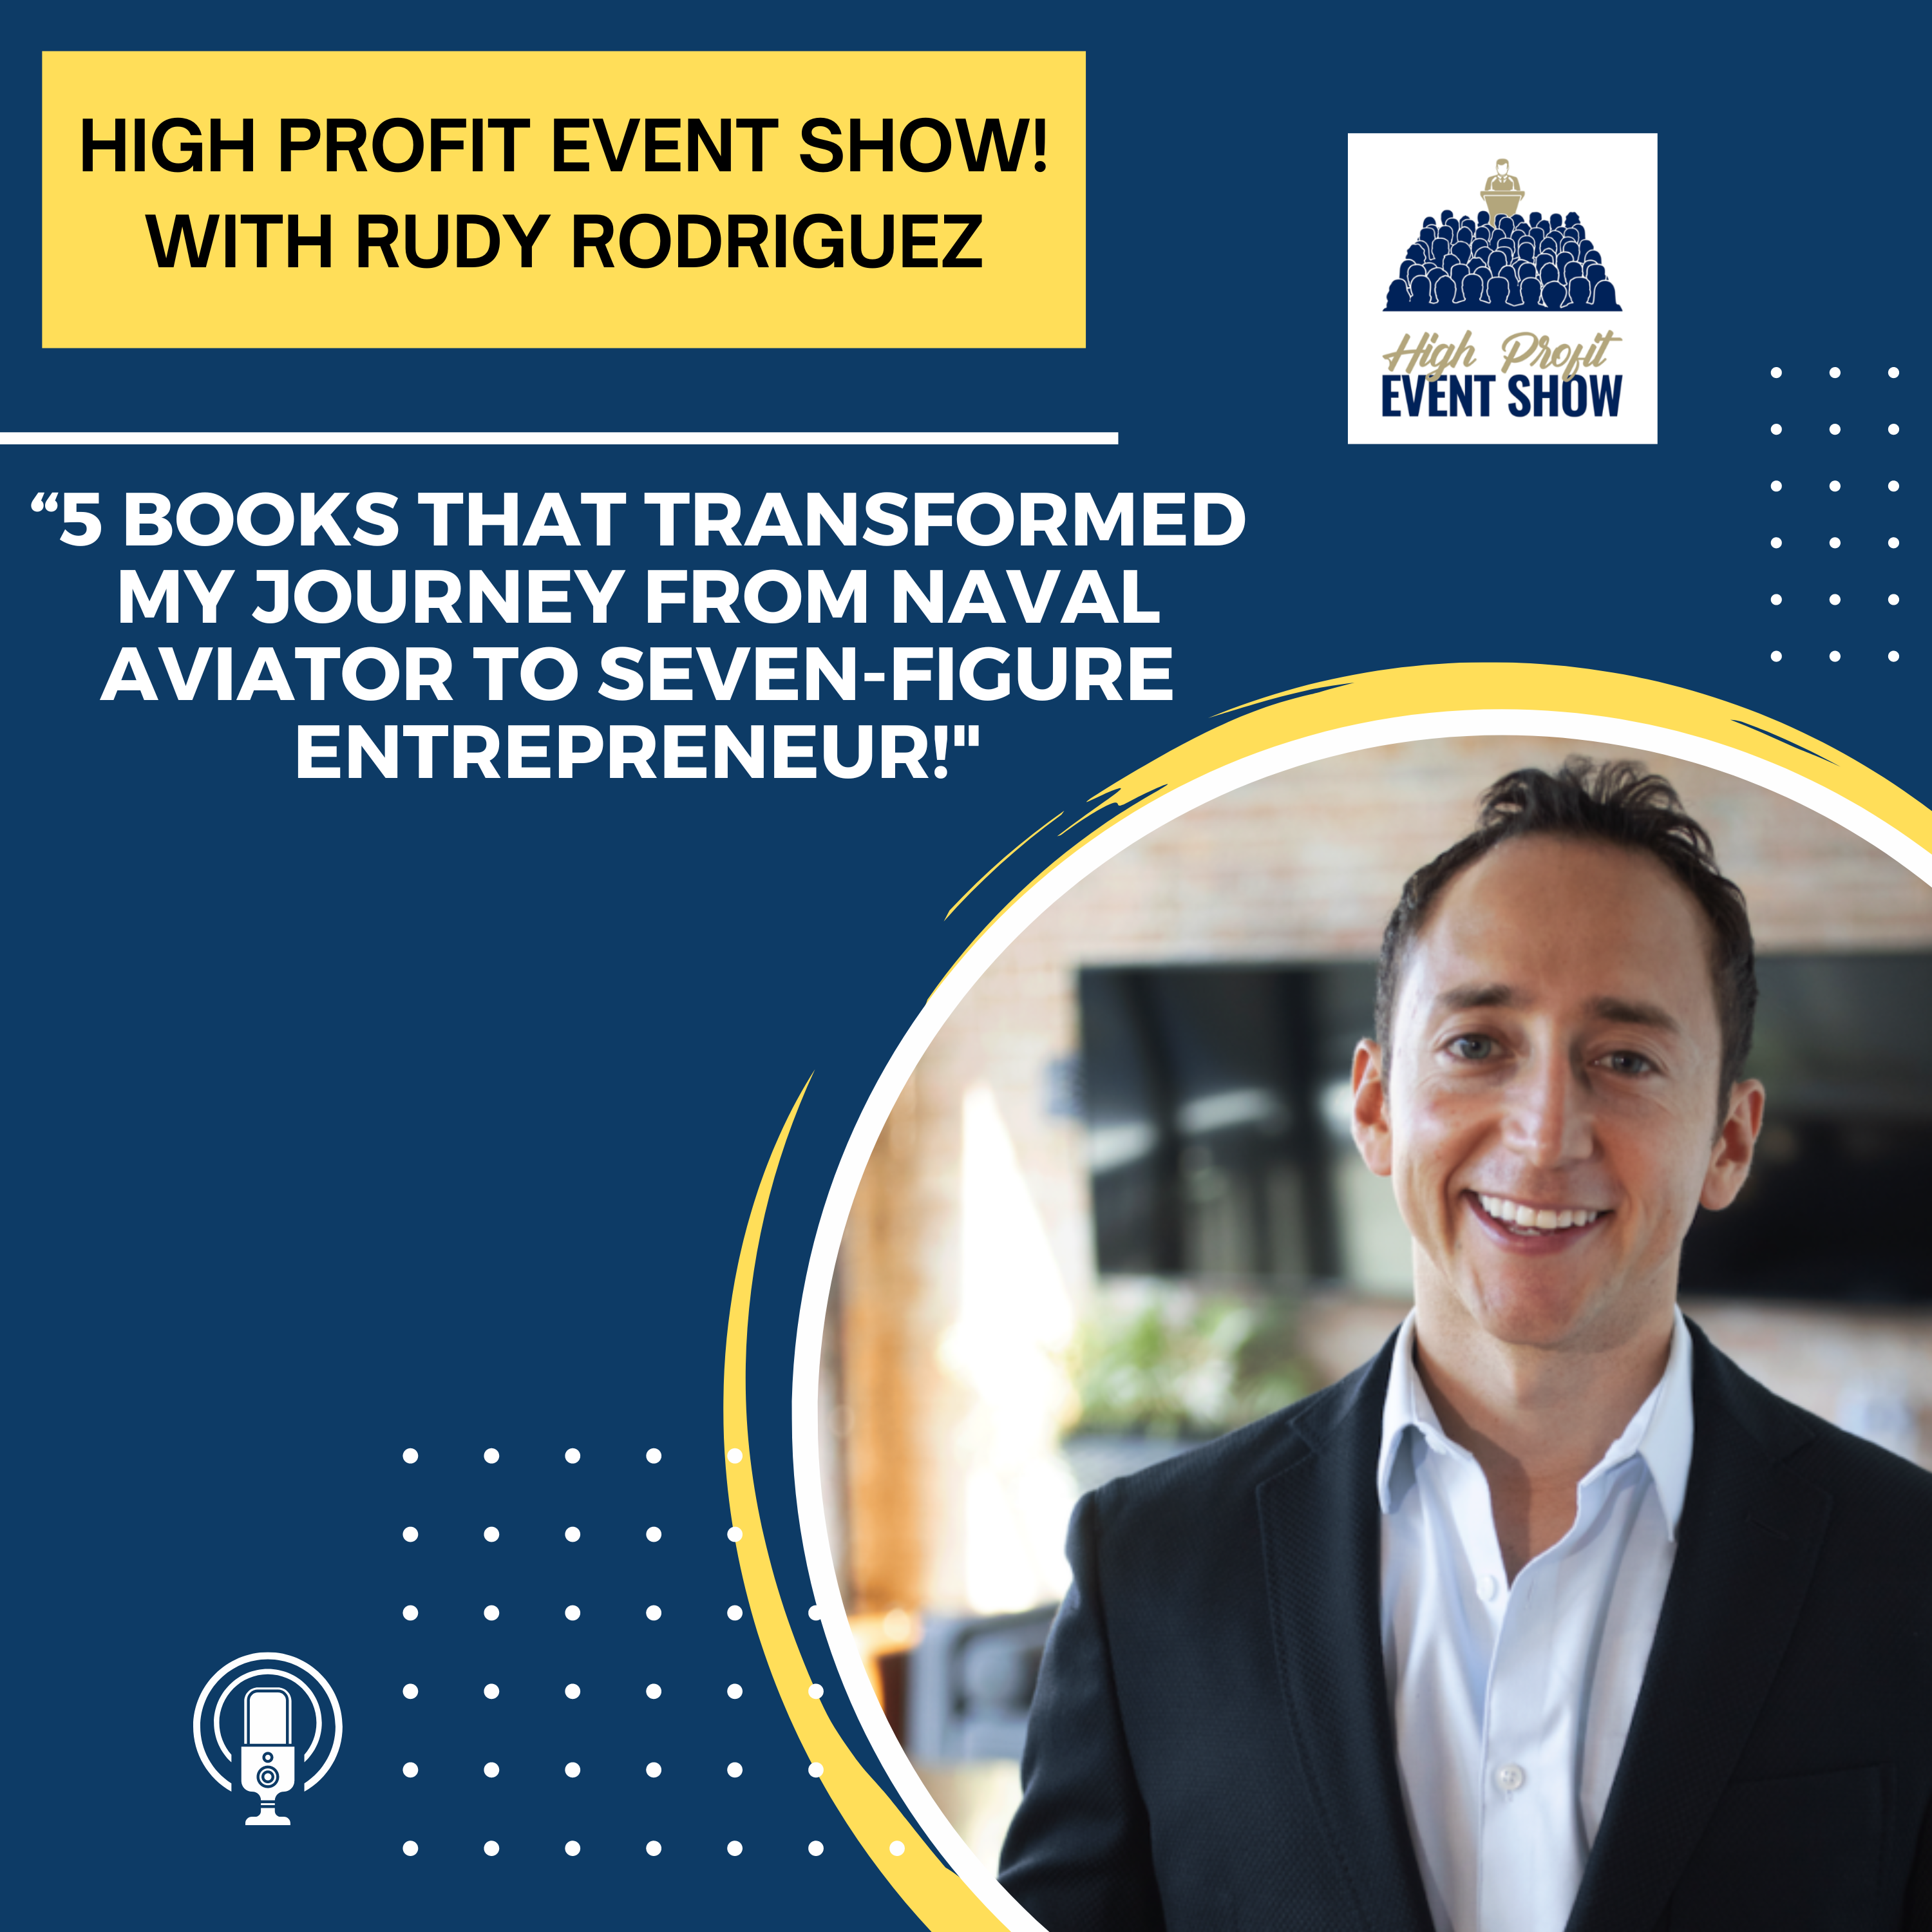 5 Books That Transformed My Journey from Naval Aviator to Seven-Figure Entrepreneur!